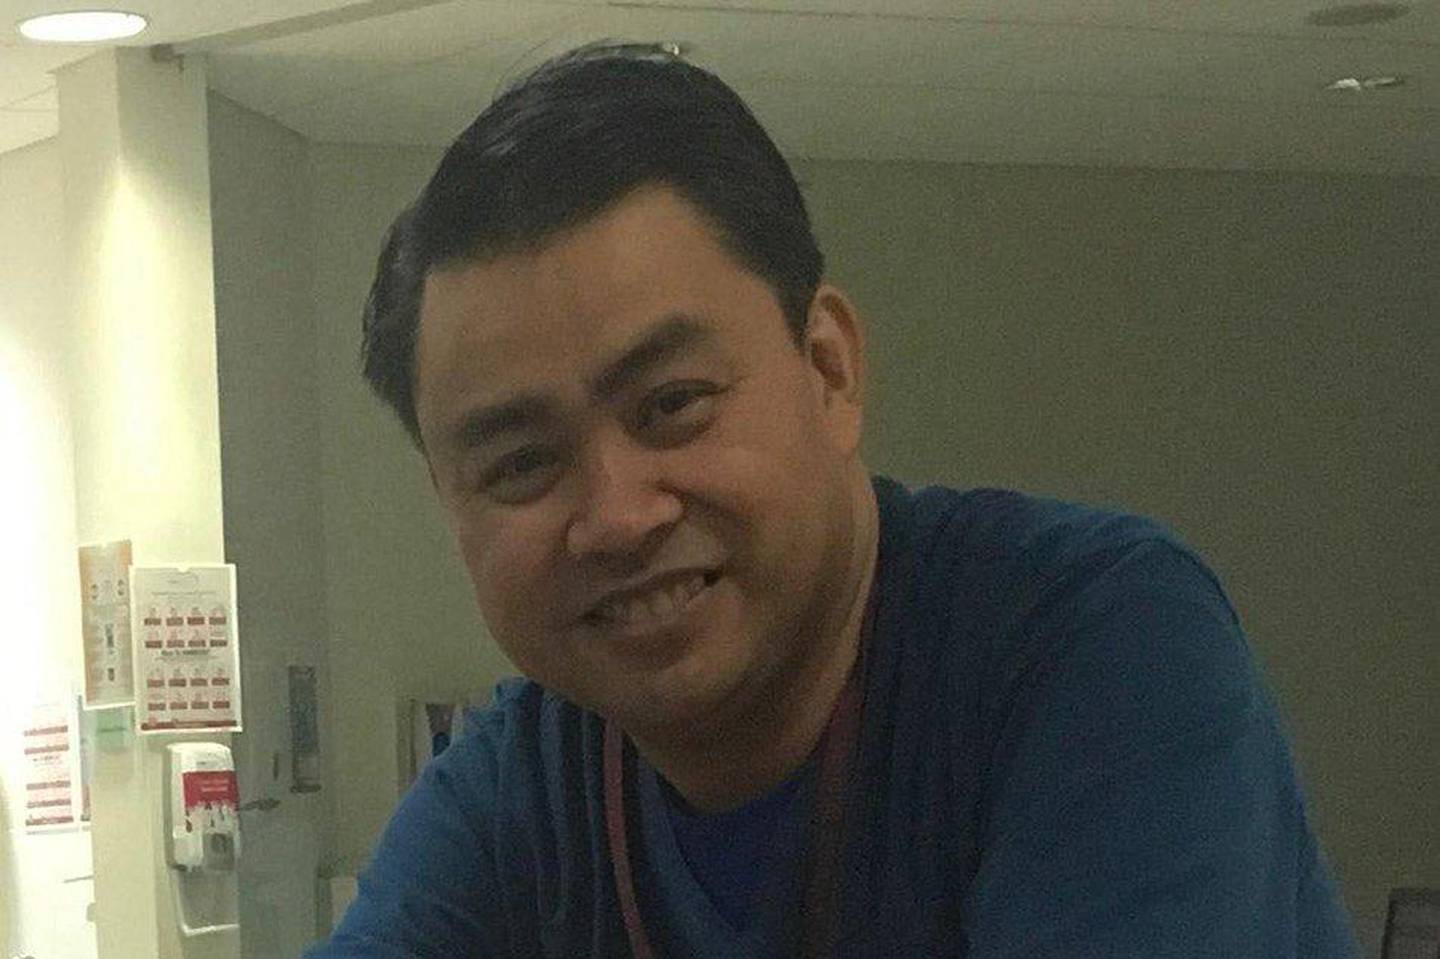 Marlon Jimenea worked in the ICY at the University Hospital of Sharjah and died three weeks after contracting Covid-19. Courtesy: The Filipino Times